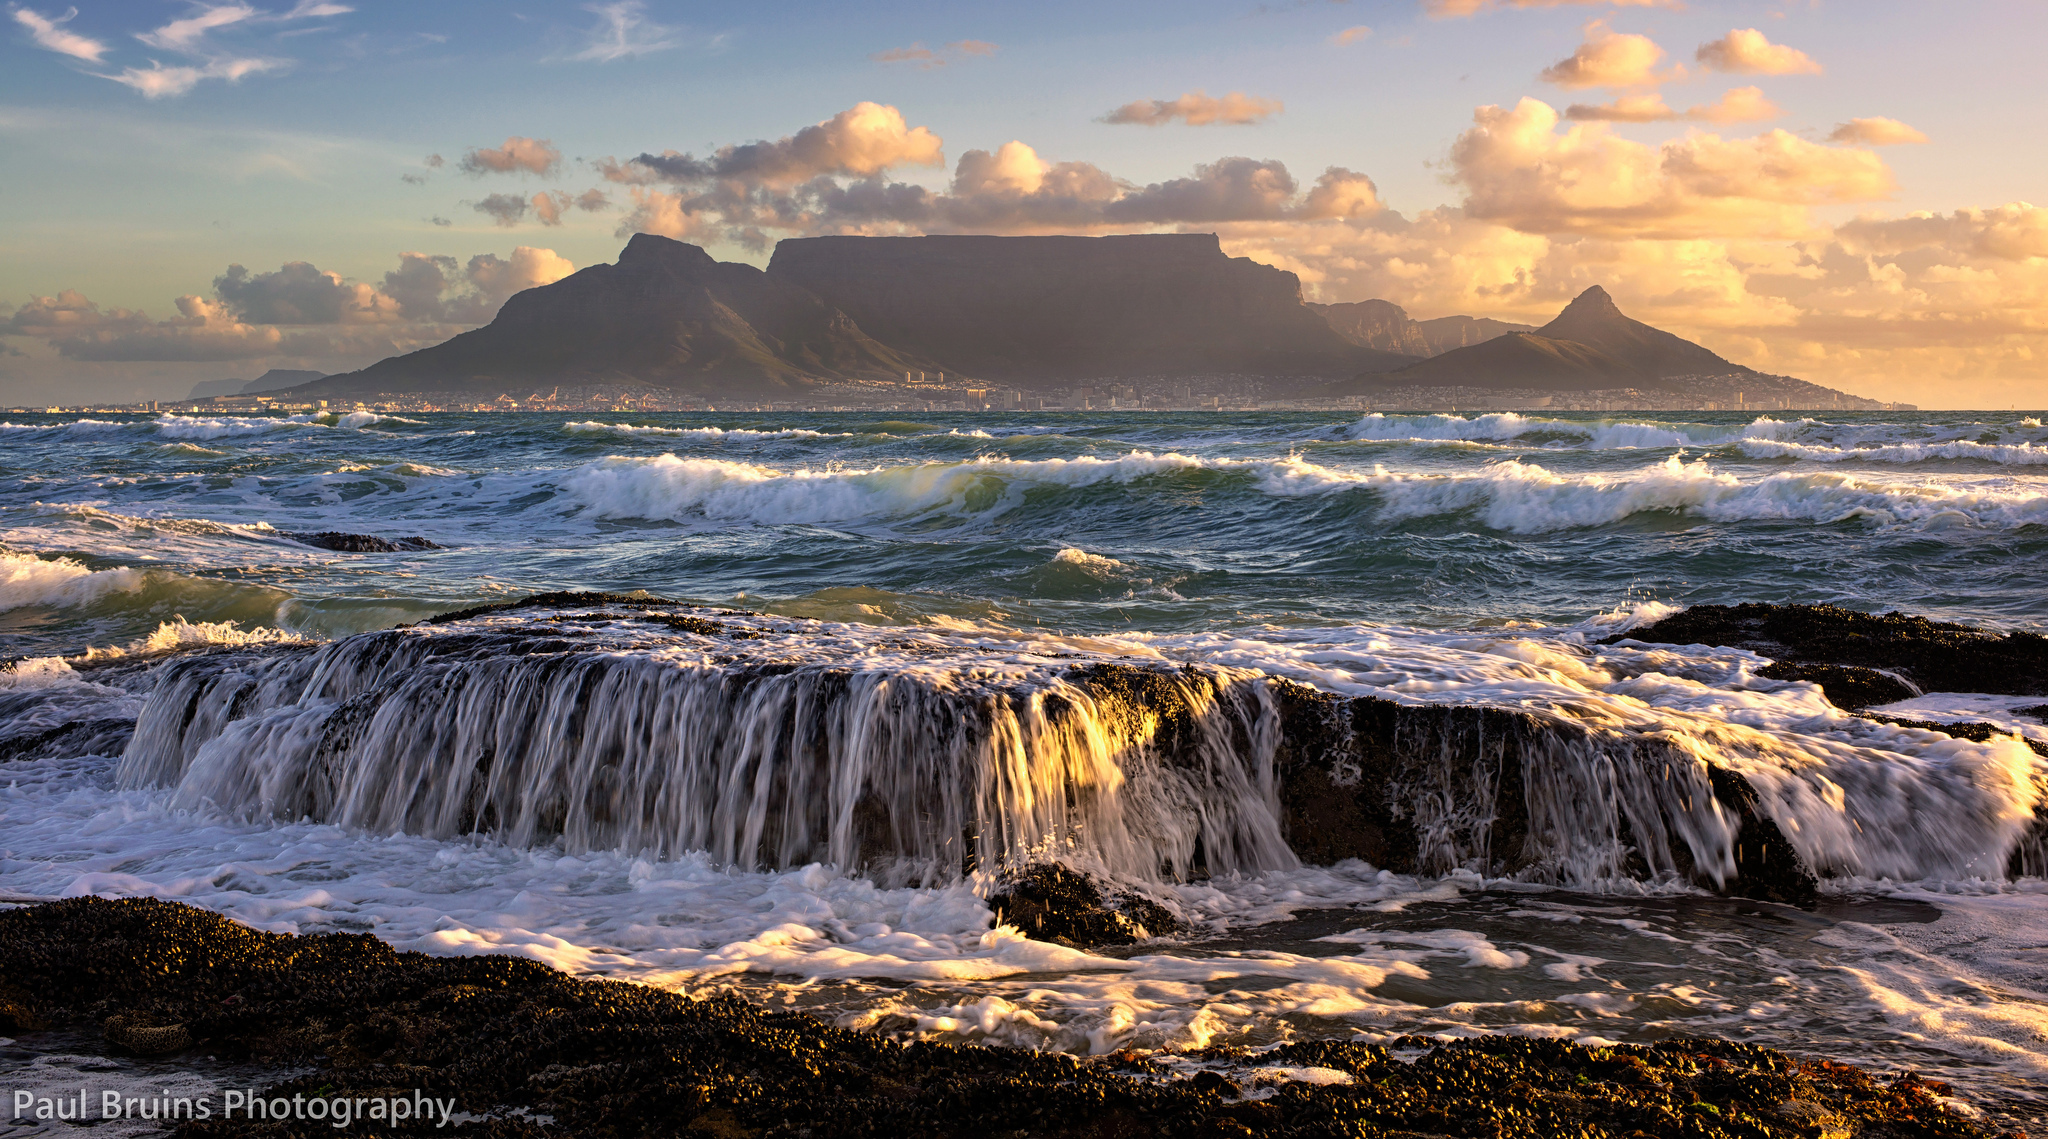 Cape town hd papers and backgrounds